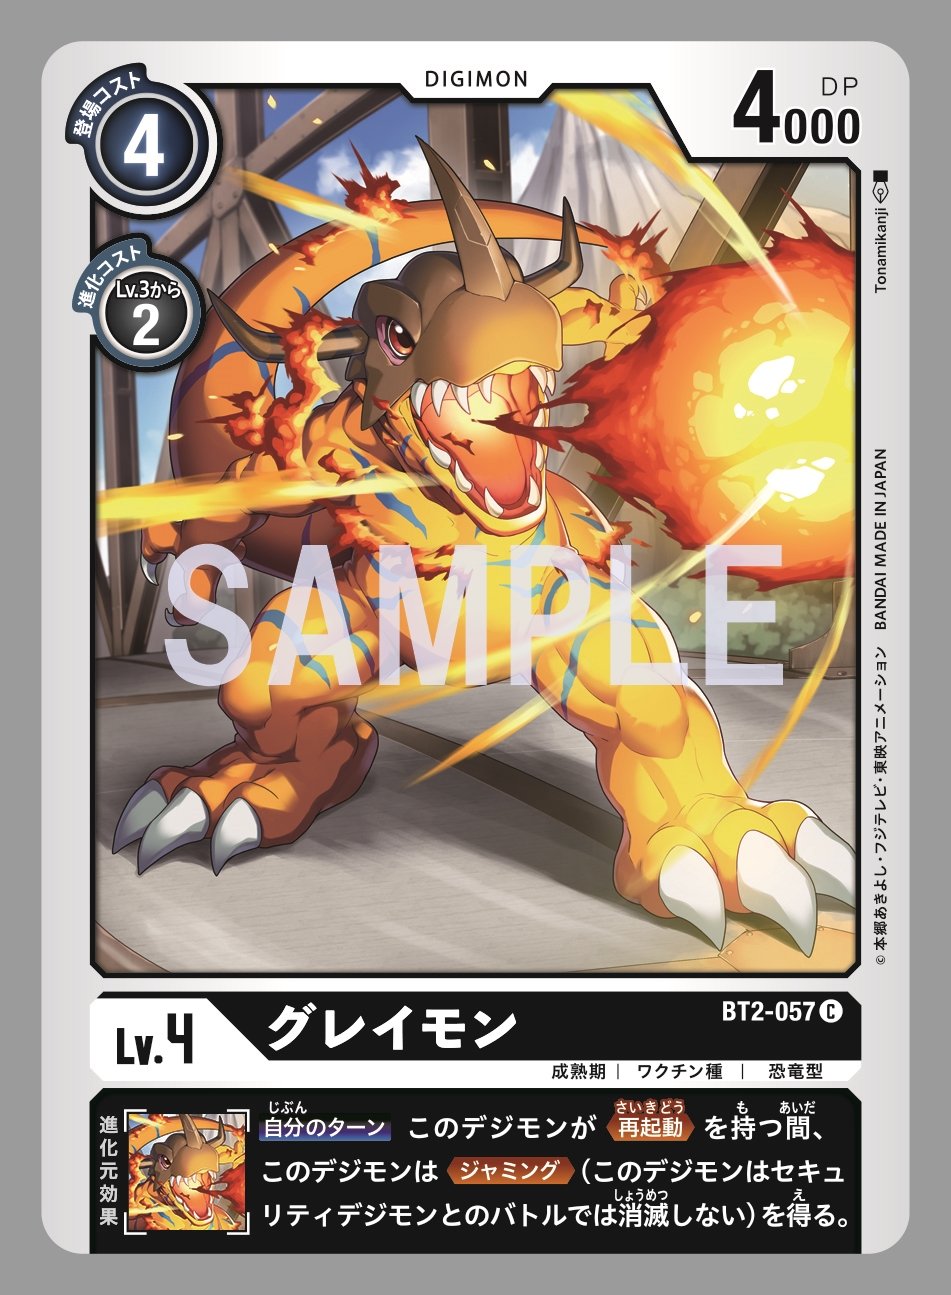 Details about   DIGIMON CARD GAME BT2 ULTIMATE POWER GREYMON ANDROMON COMMON C BLACK PLAYSET 